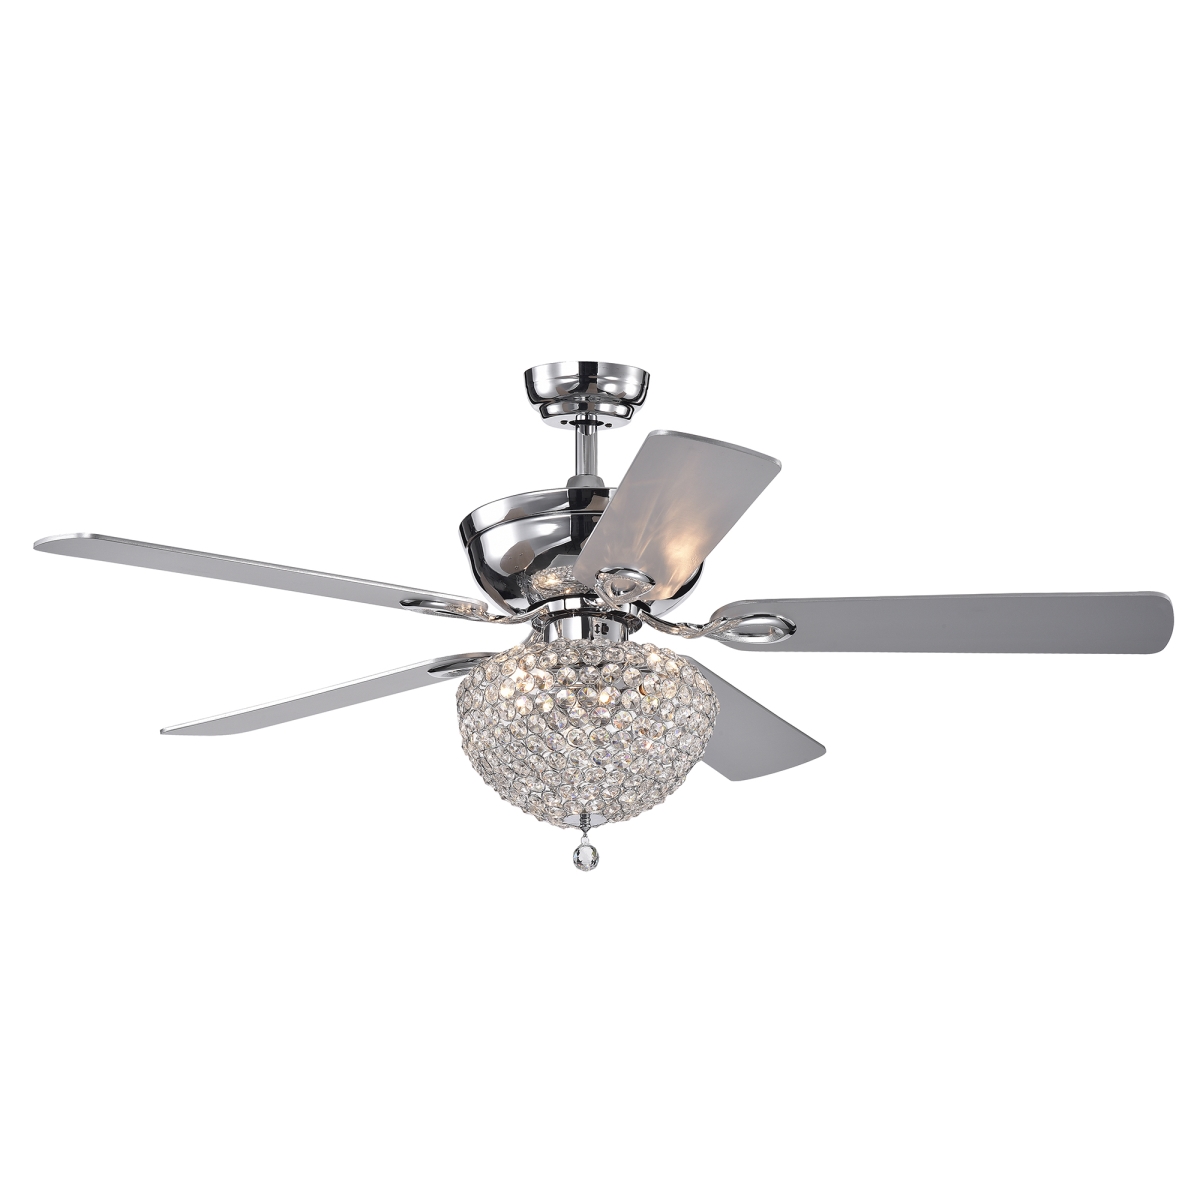 Cfl-8176remo-cha 52 In. Swarna 5-blade Lighted Ceiling Fan With Crystal Bowl Chandelier, Chrome